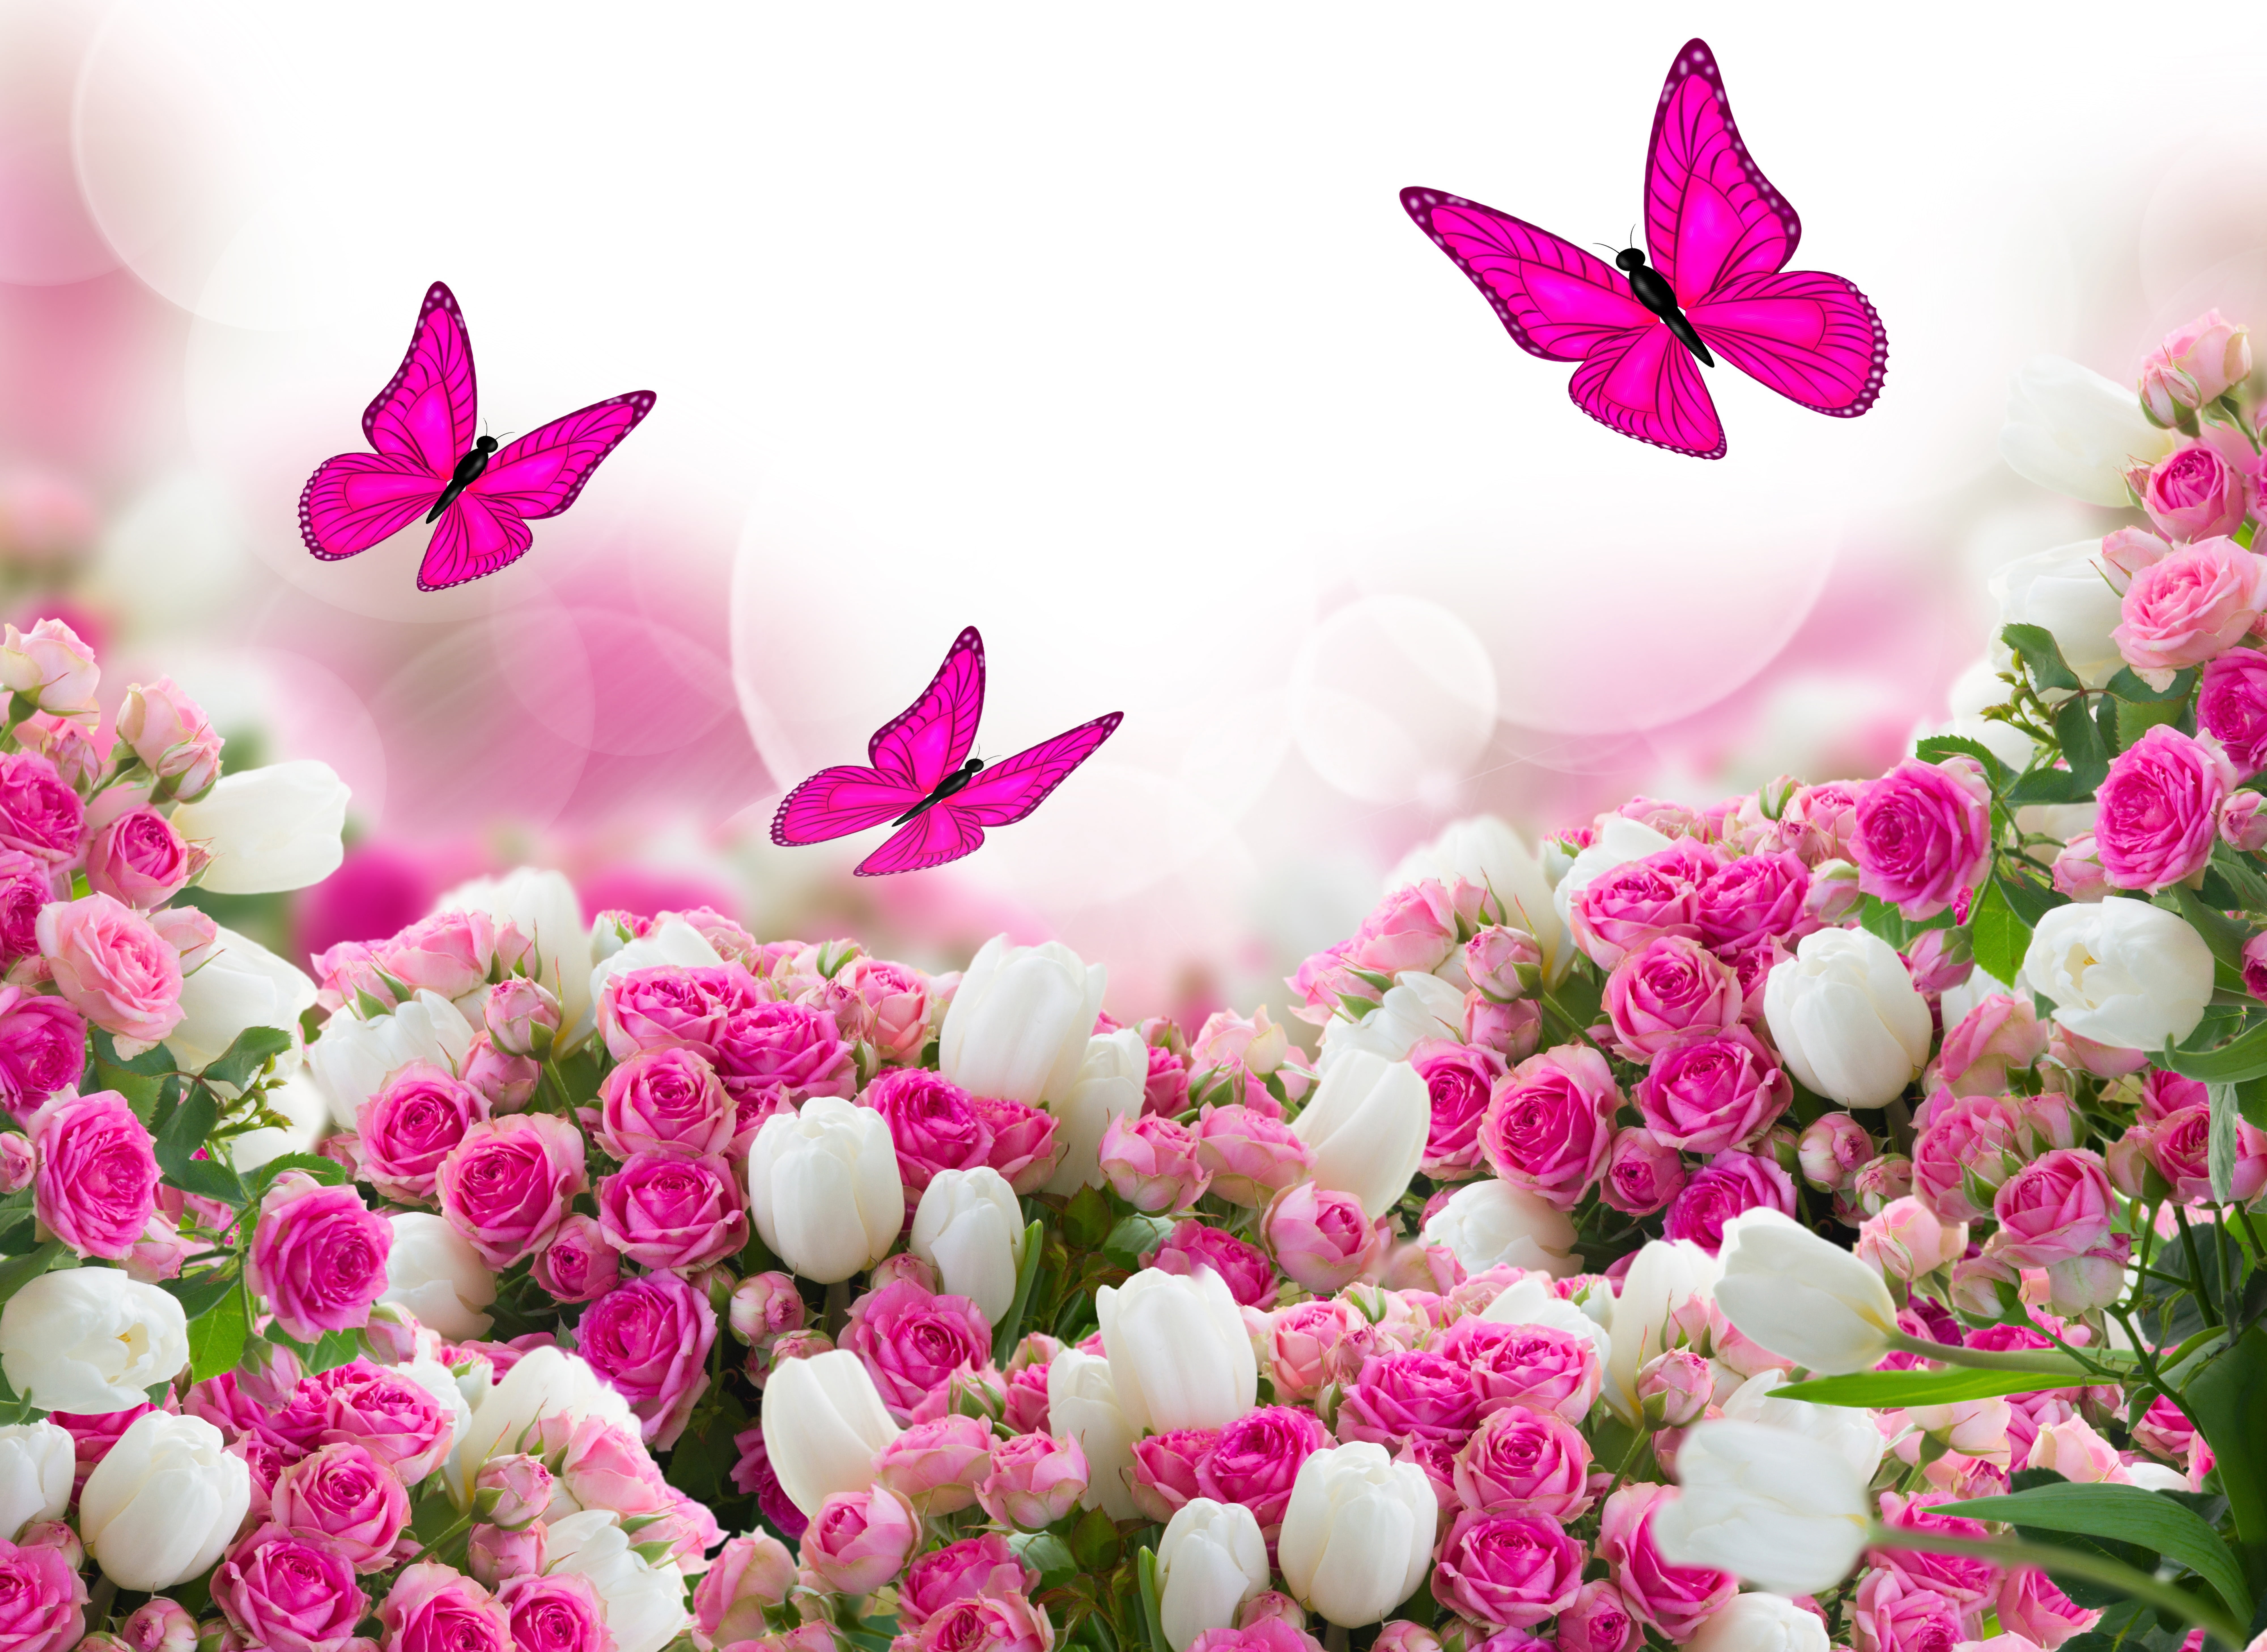 pink butterflies illustration, butterfly, flowers, roses, tulips